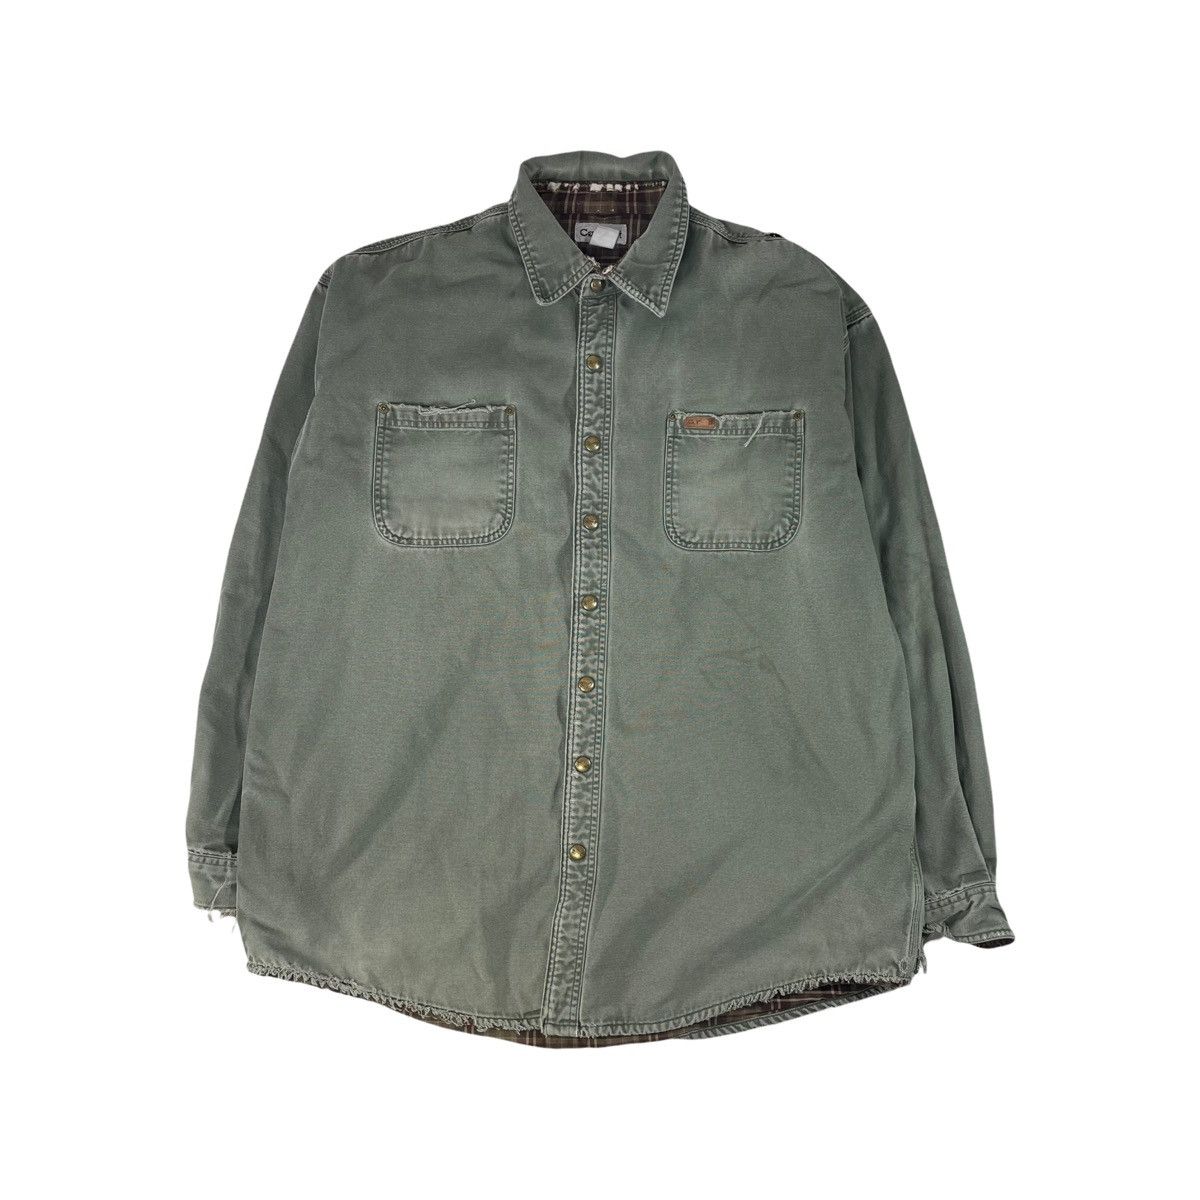 Vintage Vintage 90s Carhartt faded canvas button up shirt | Grailed